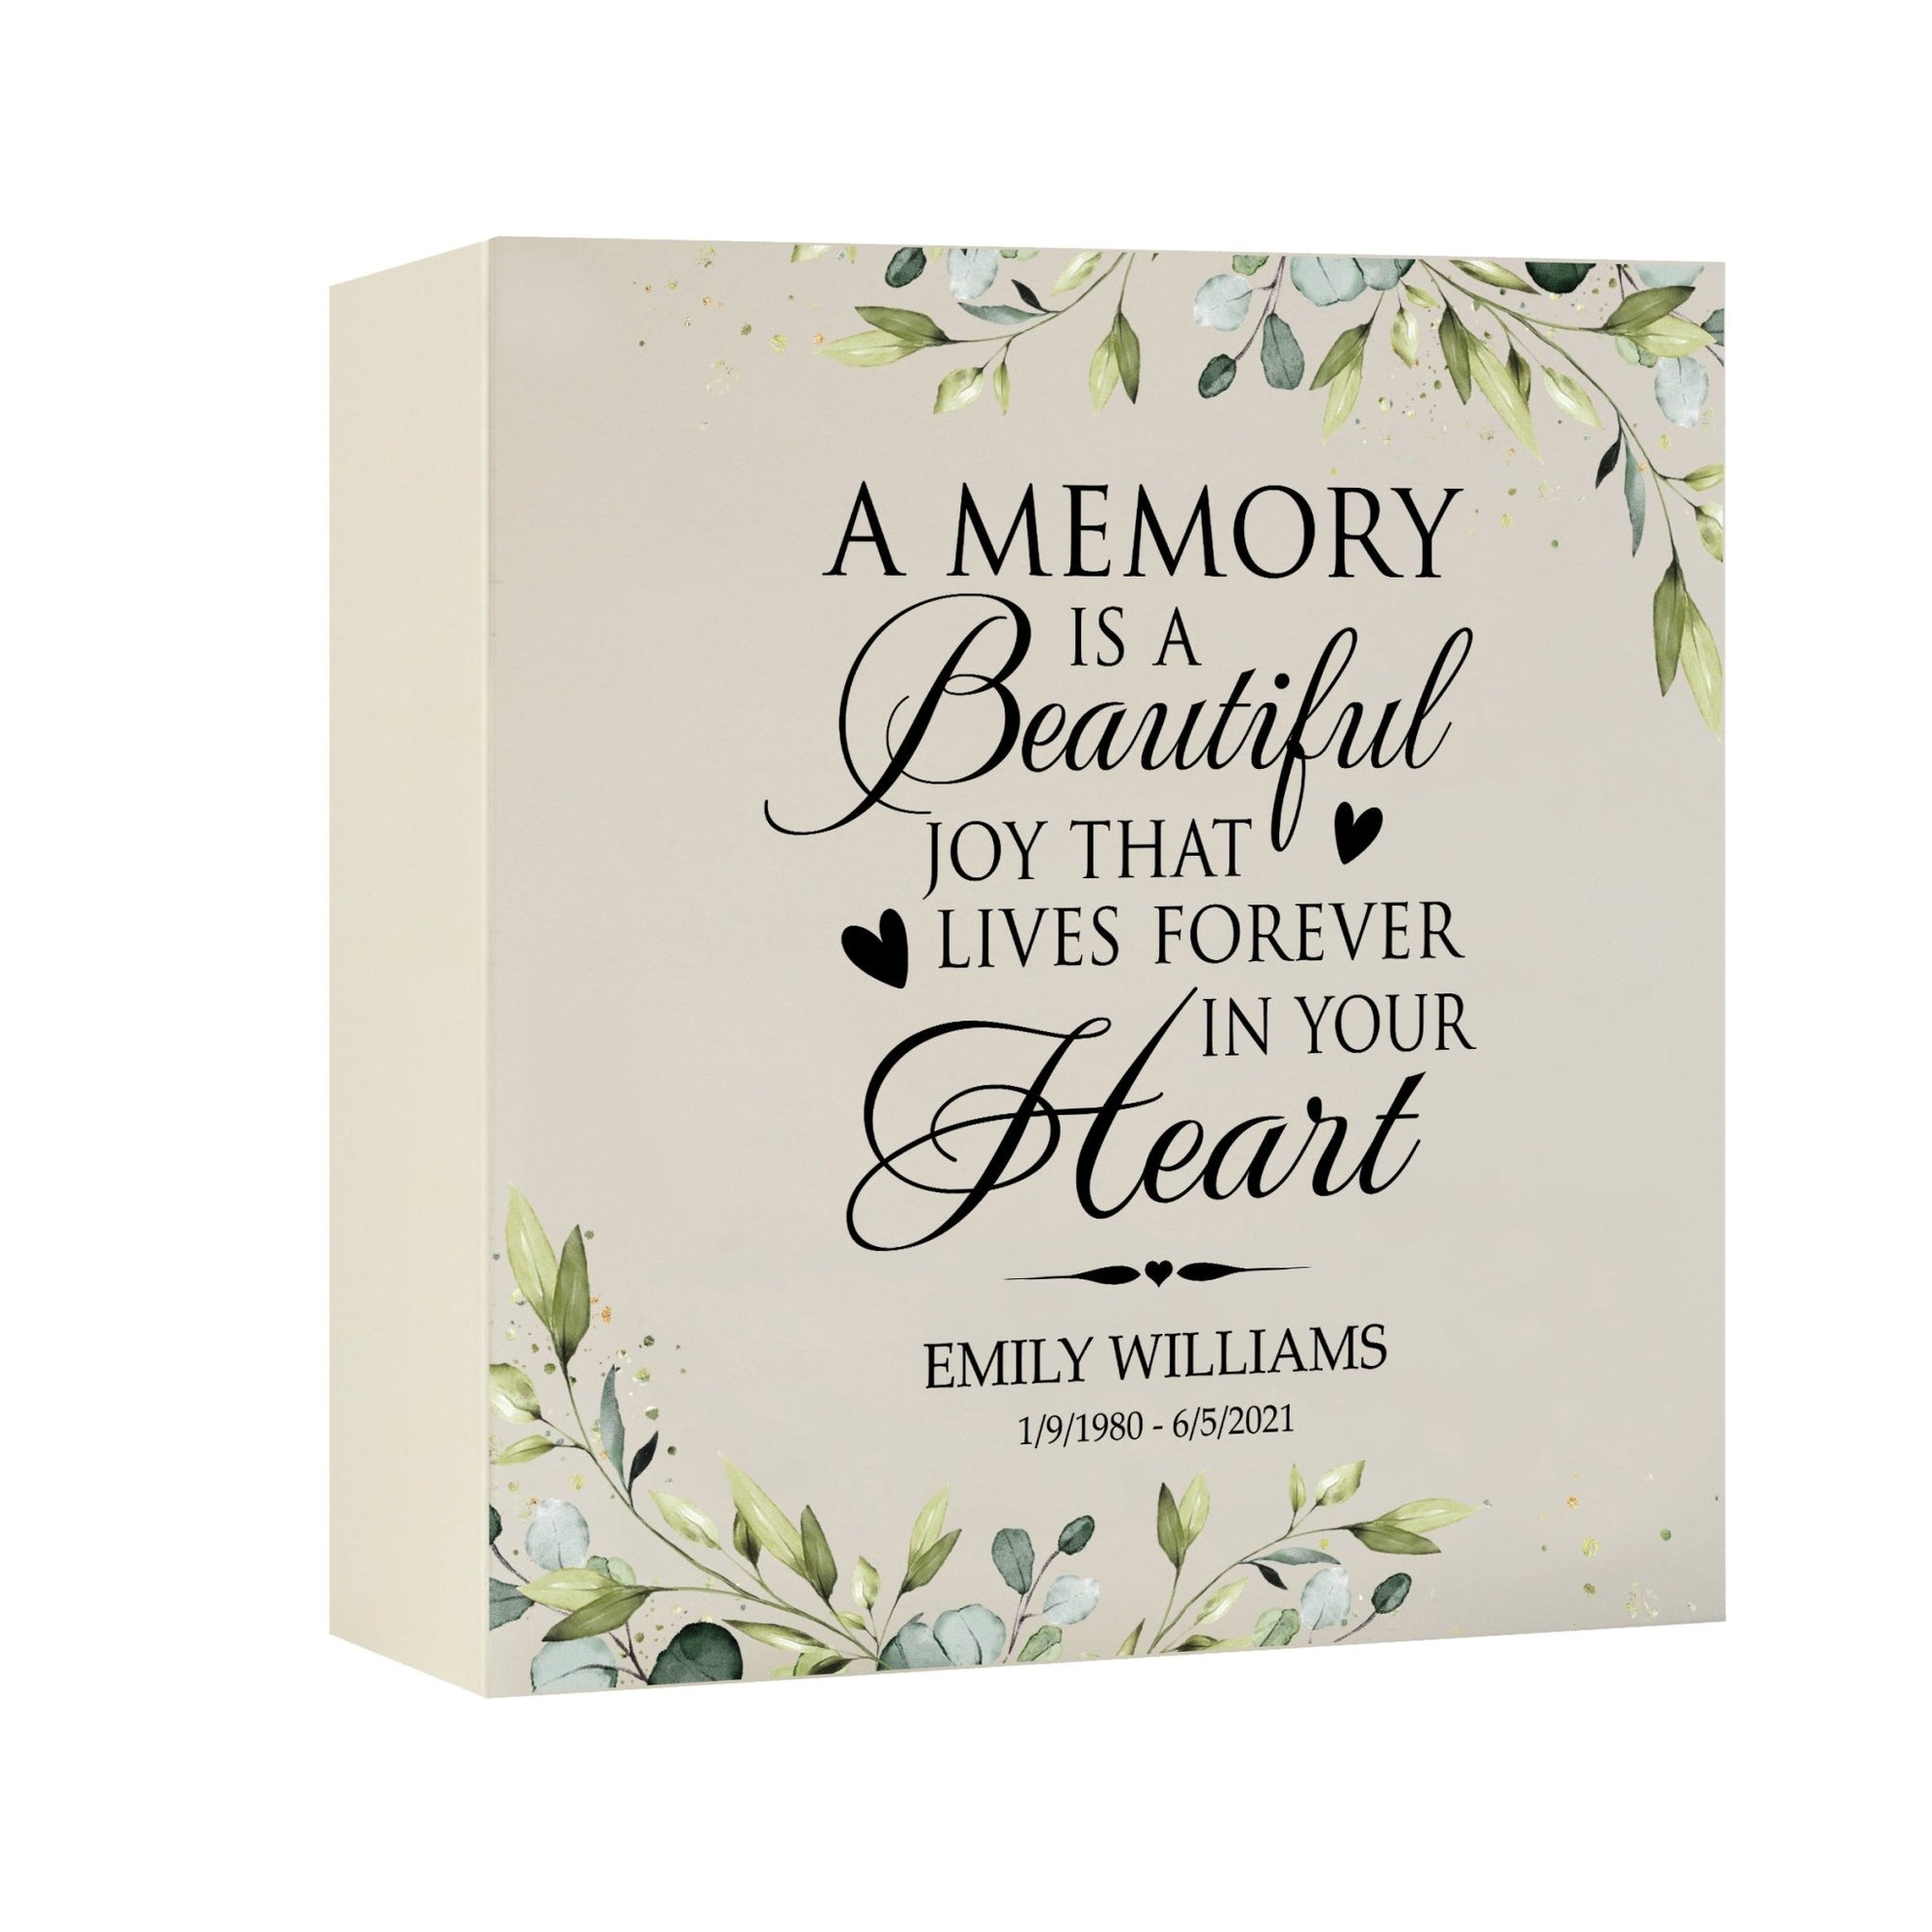 Timeless Human Memorial Shadow Box Urn With Inspirational Verse in Ivory - A Memory Is A Beautiful Joy - LifeSong Milestones